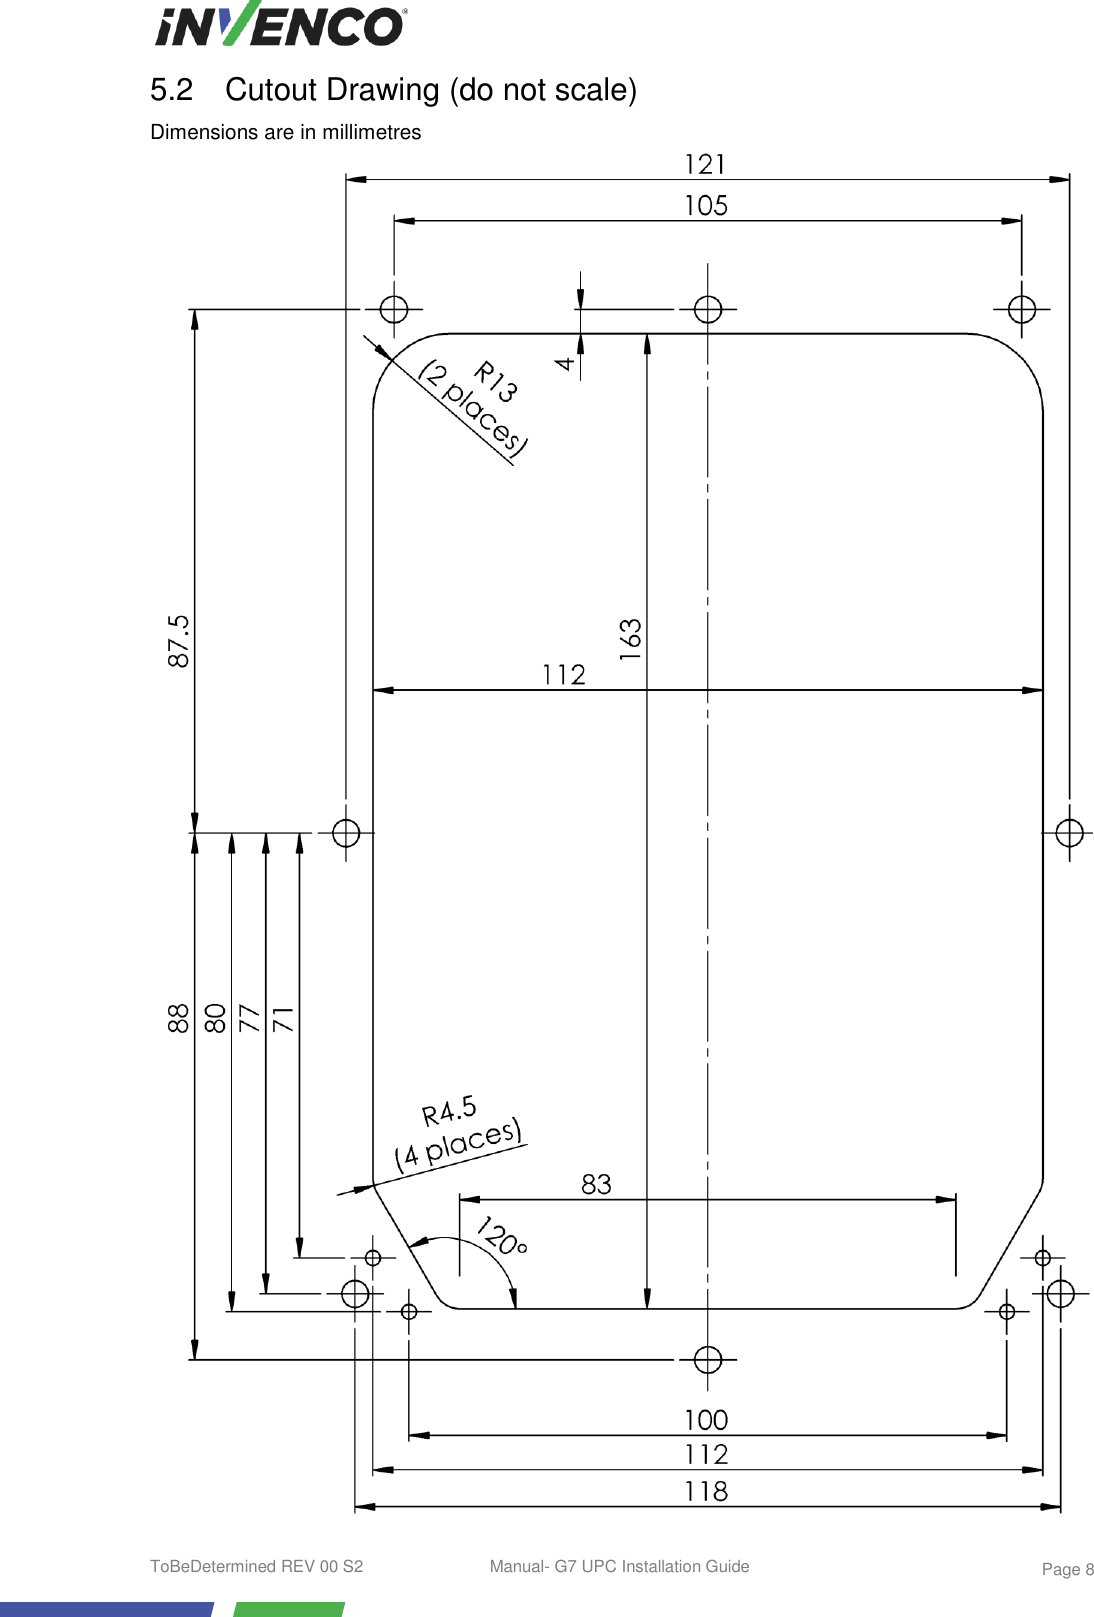  ToBeDetermined REV 00 S2  Manual- G7 UPC Installation Guide    Page 8 5.2  Cutout Drawing (do not scale) Dimensions are in millimetres  